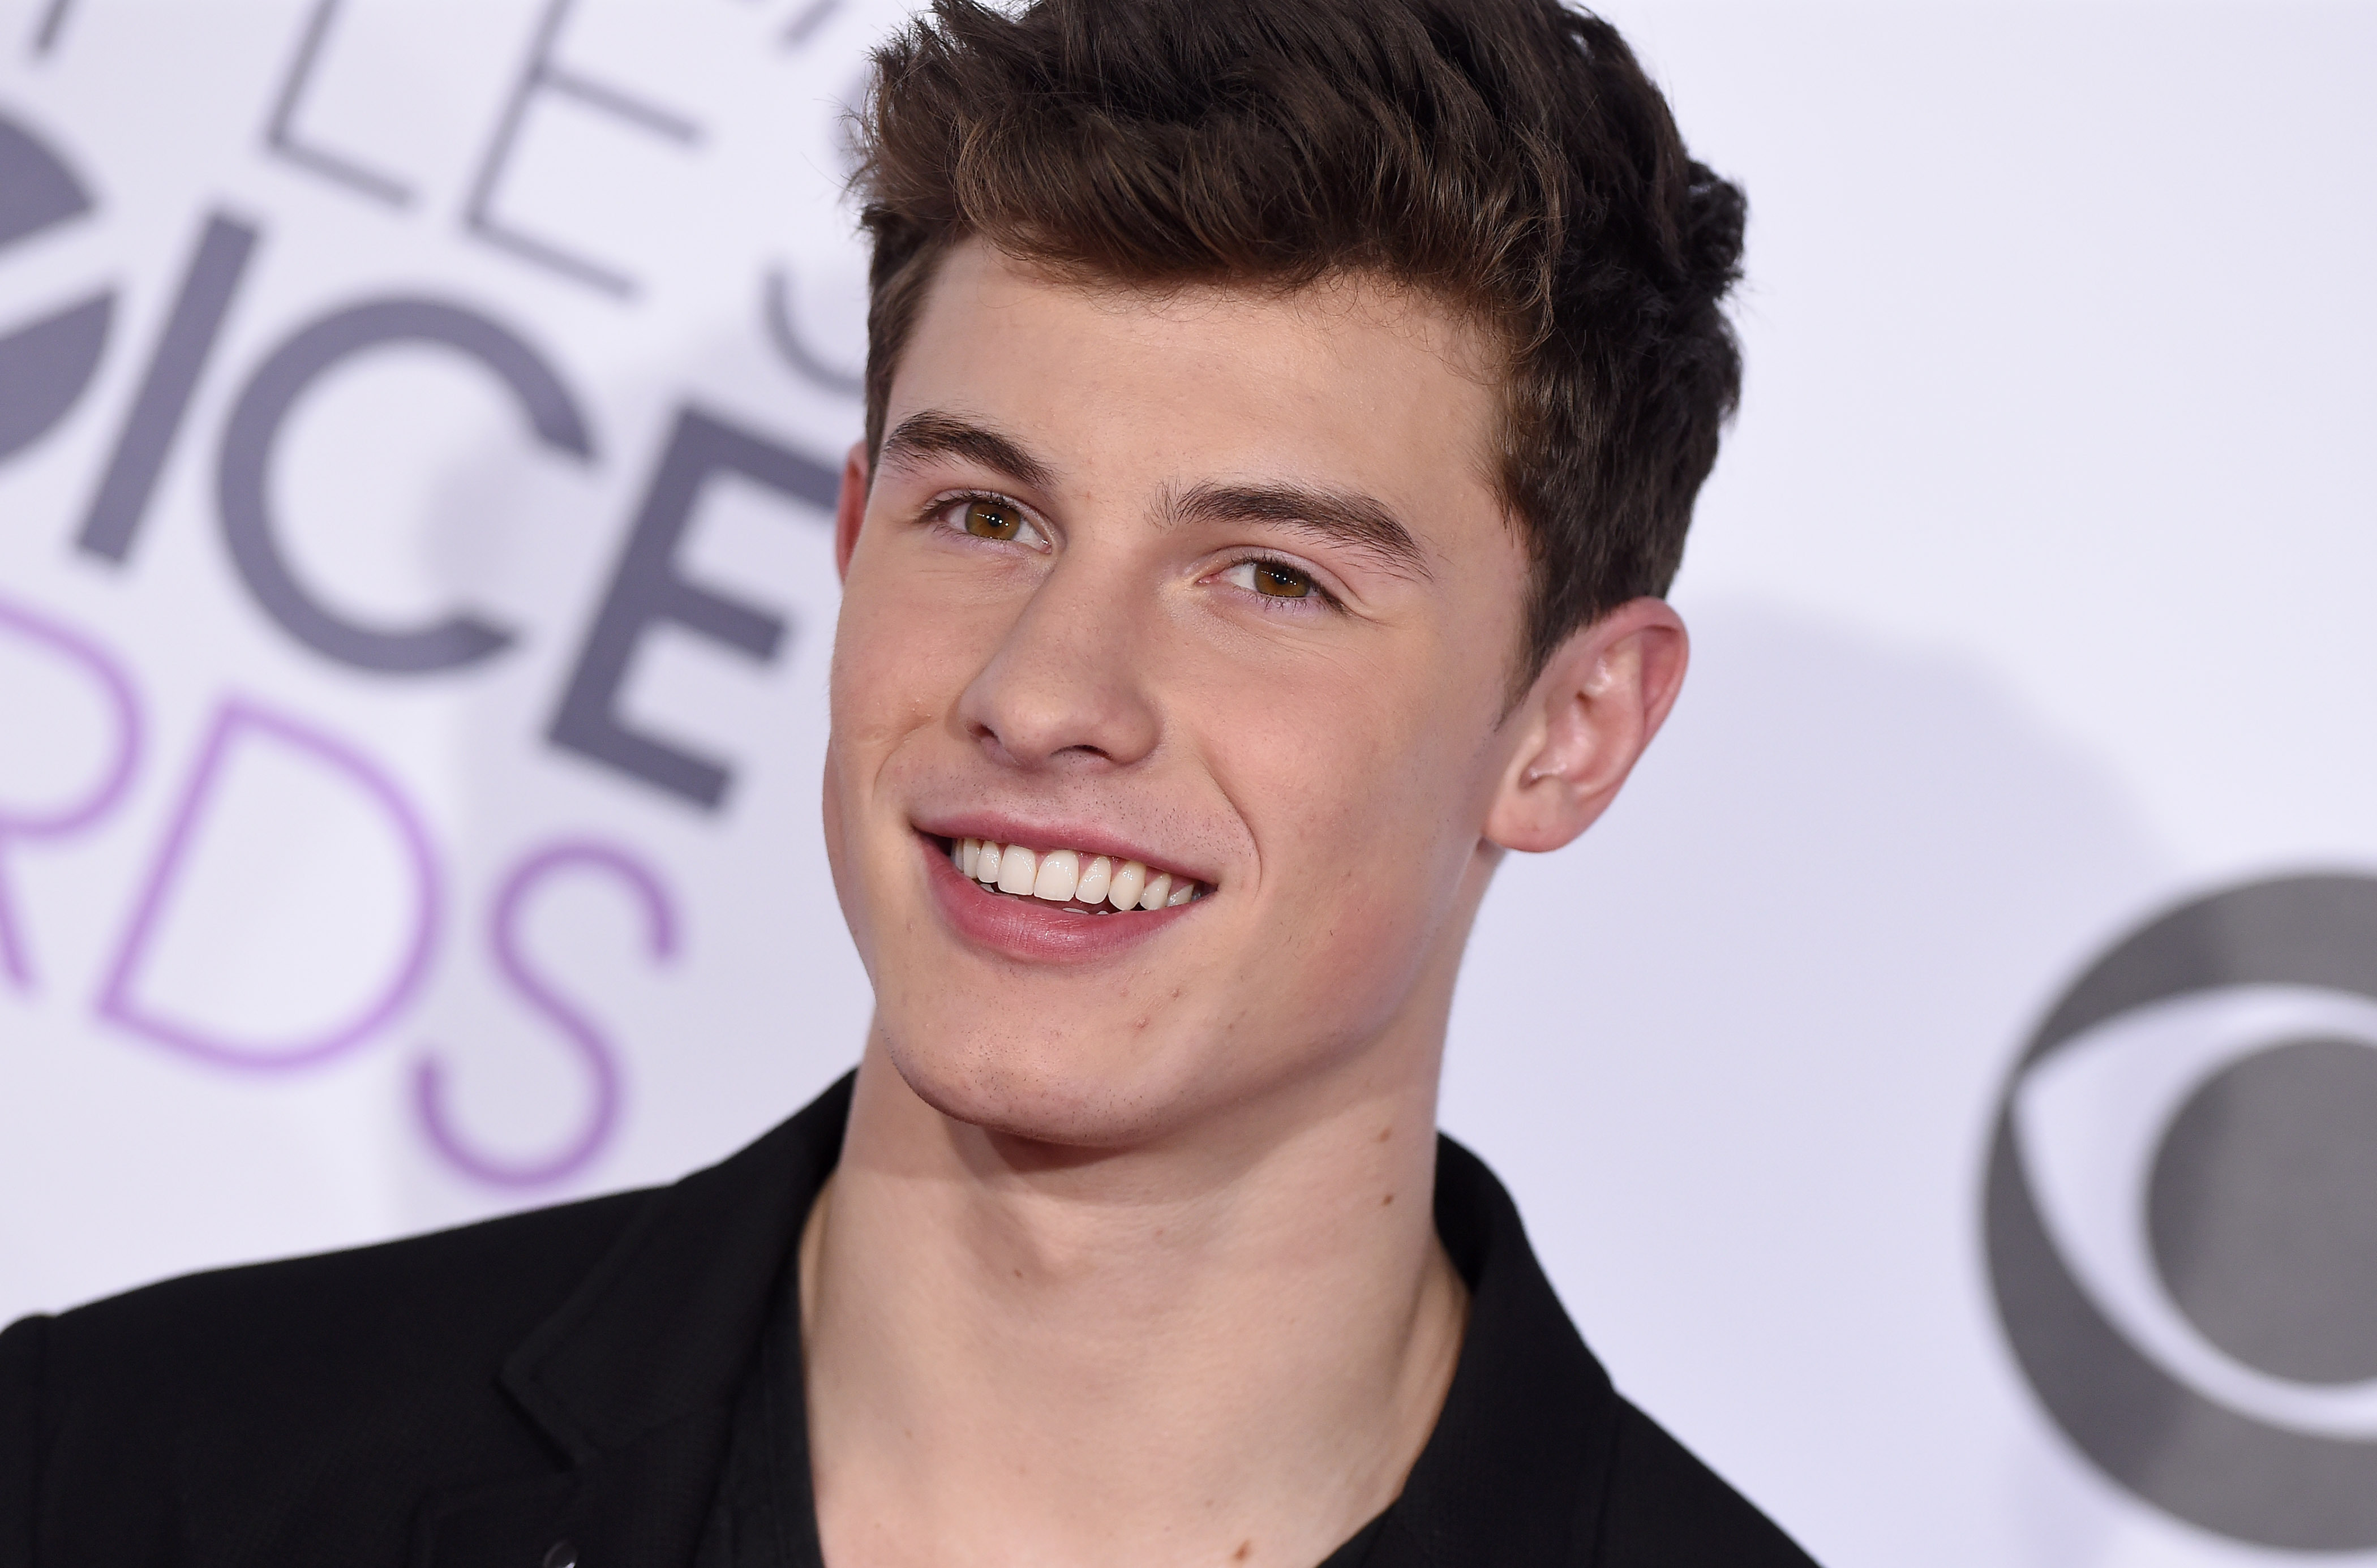 Shawn Mendes Photo Gallery Related Keywords & Suggestions - 